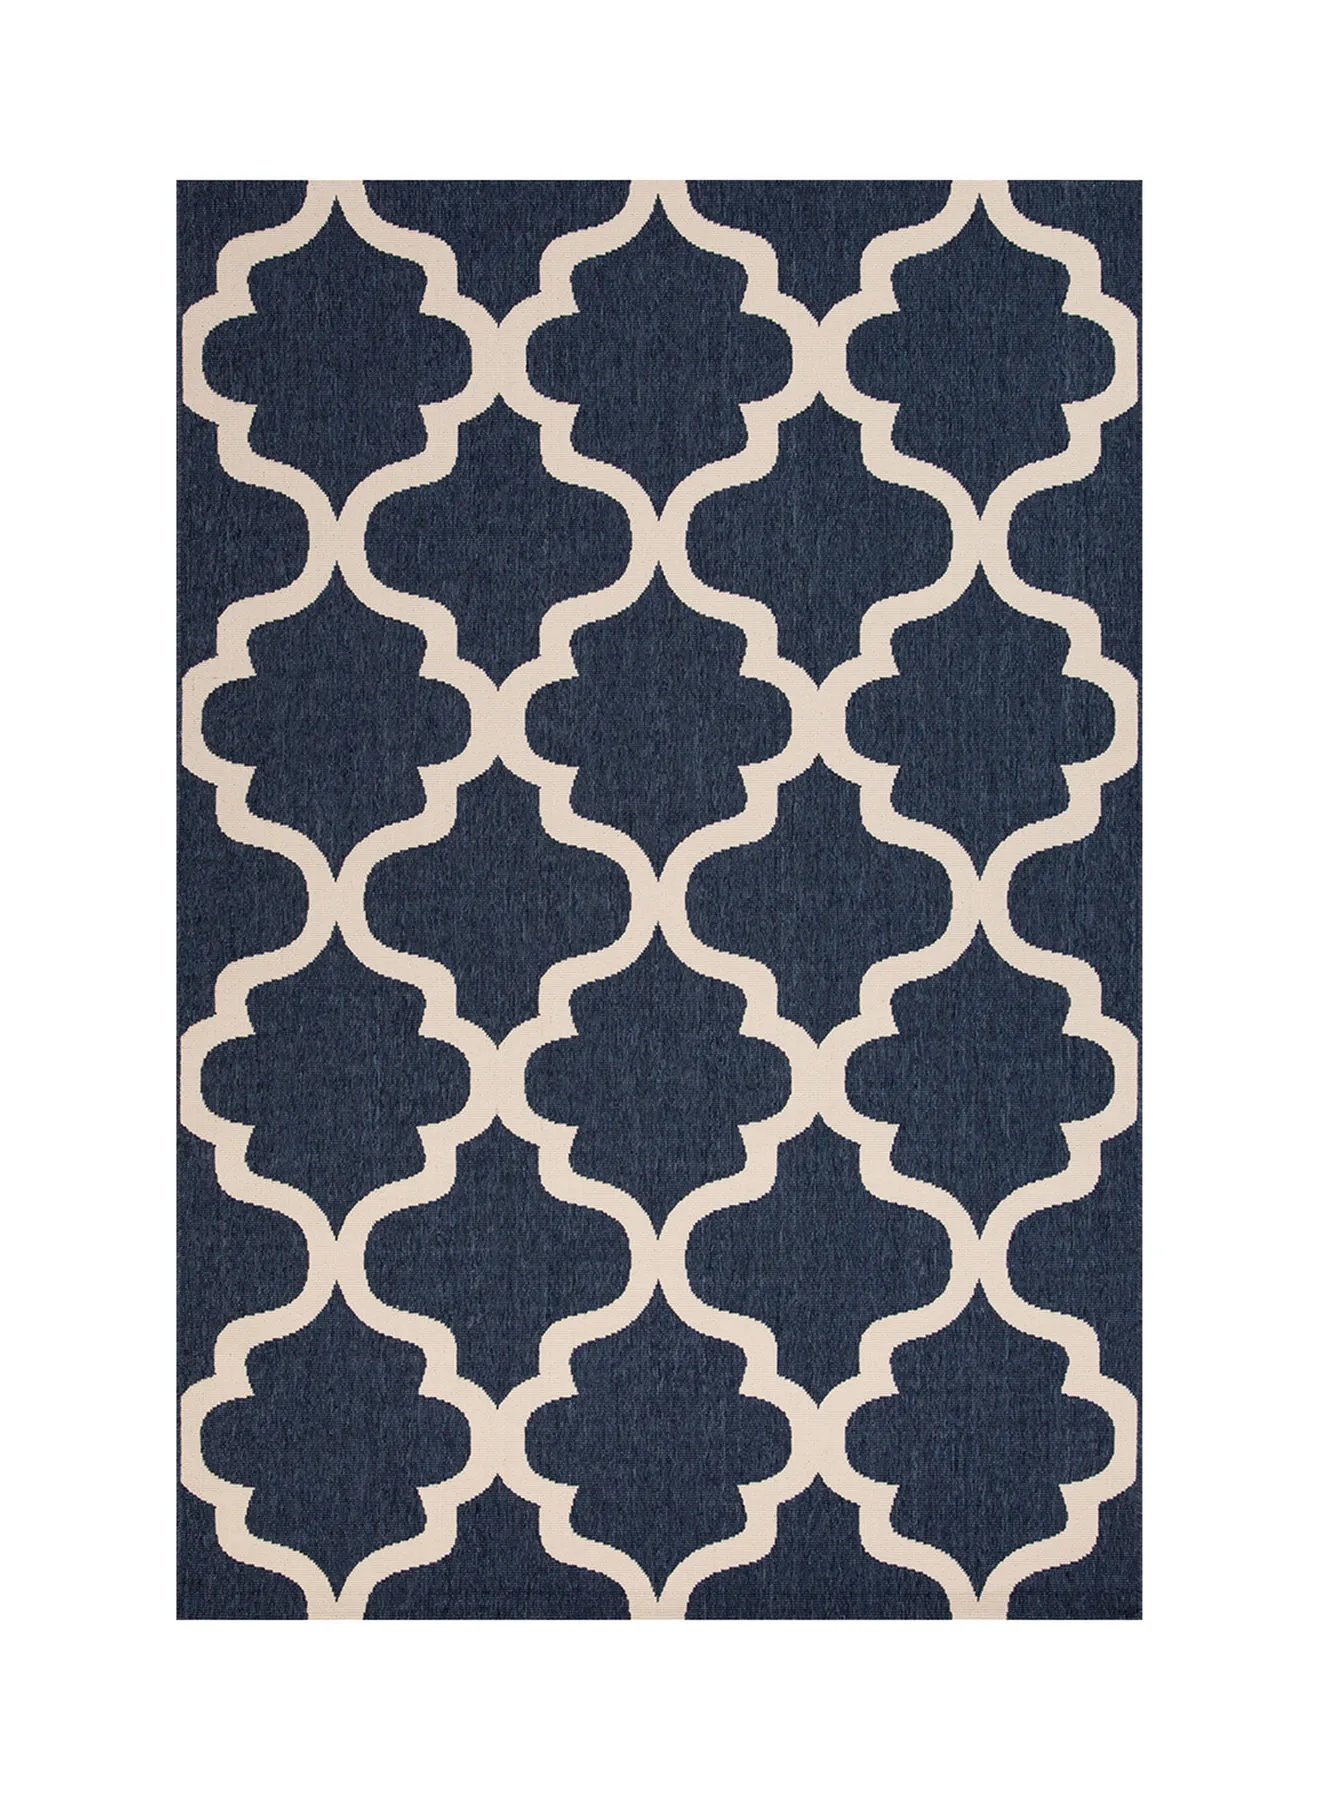 ebb & flow L. Tributary Outdoor Unique Luxury Quality Material Carpet For The Perfect Stylish Home 2132H Blue/White 280 x 380cm